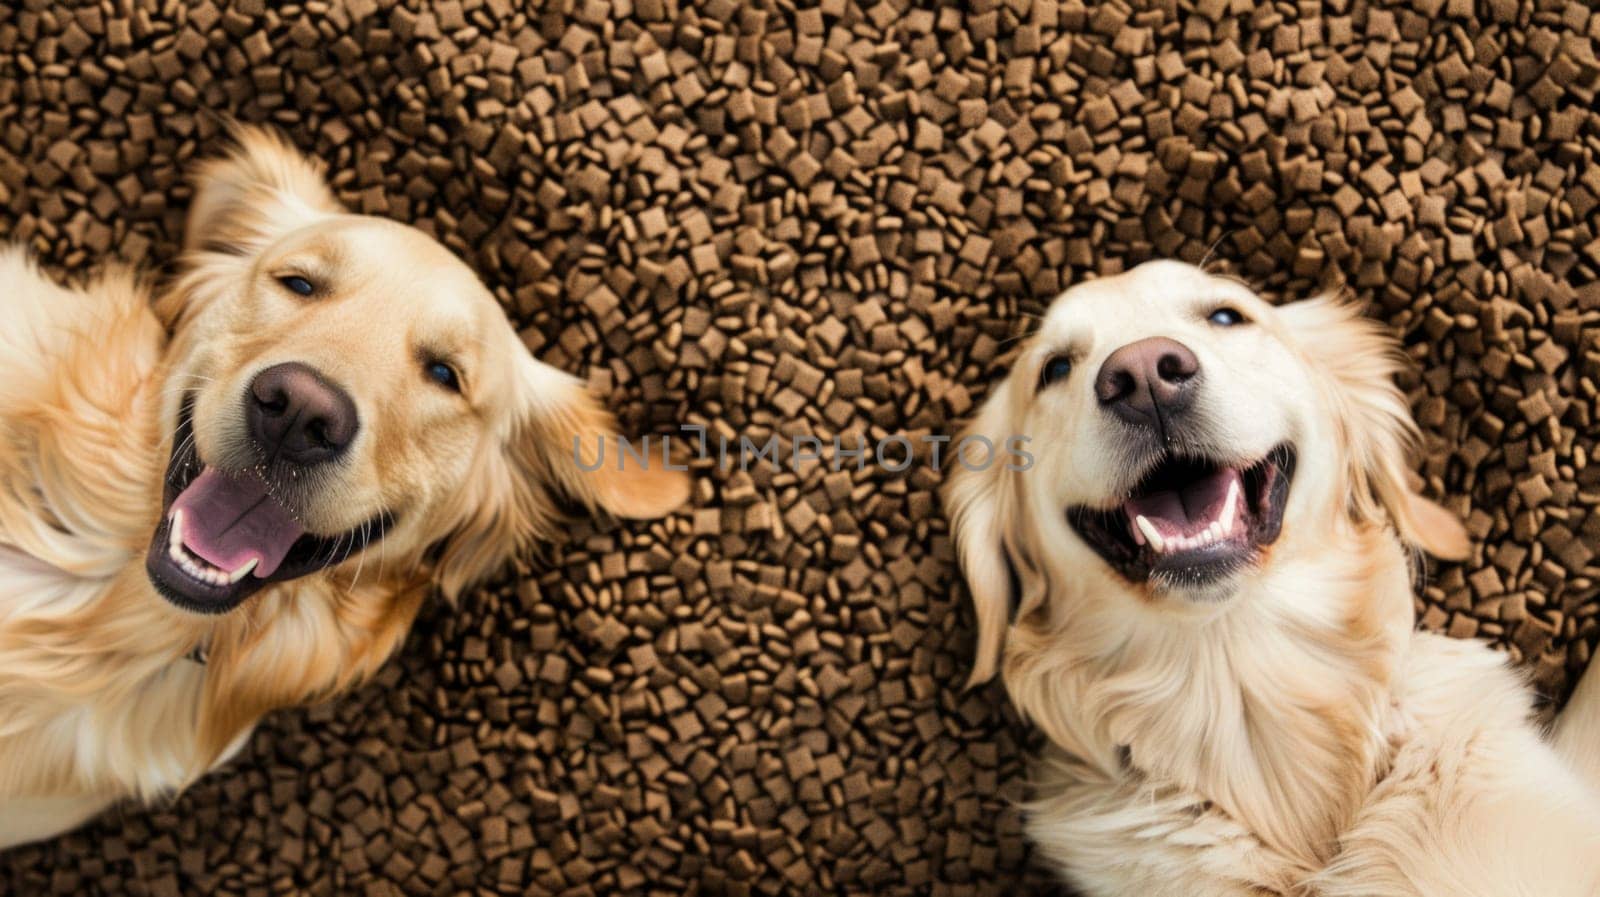 Funny top view of two happy golden retriever dogs happy and looking at camera lying over a pile of dog dry food.